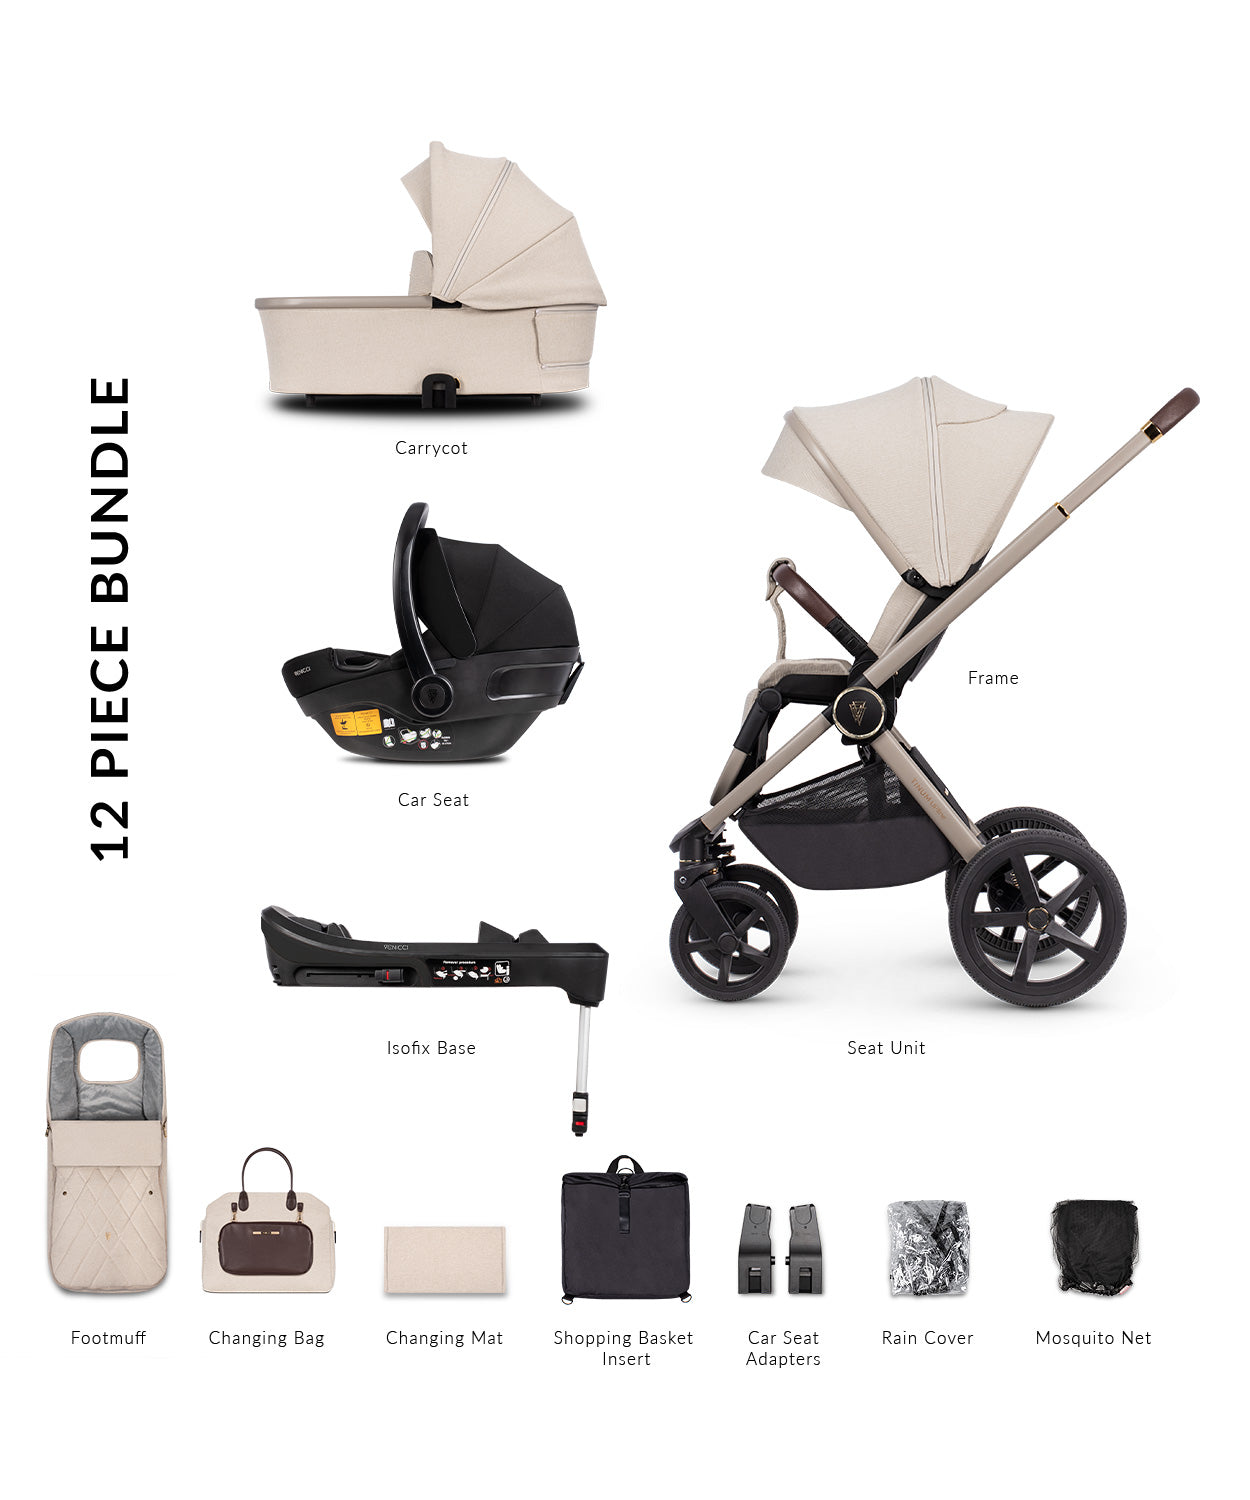 Venicci Tinum Upline 3 in 1 Travel System Bundle + Base - Stone Beige - For Your Little One